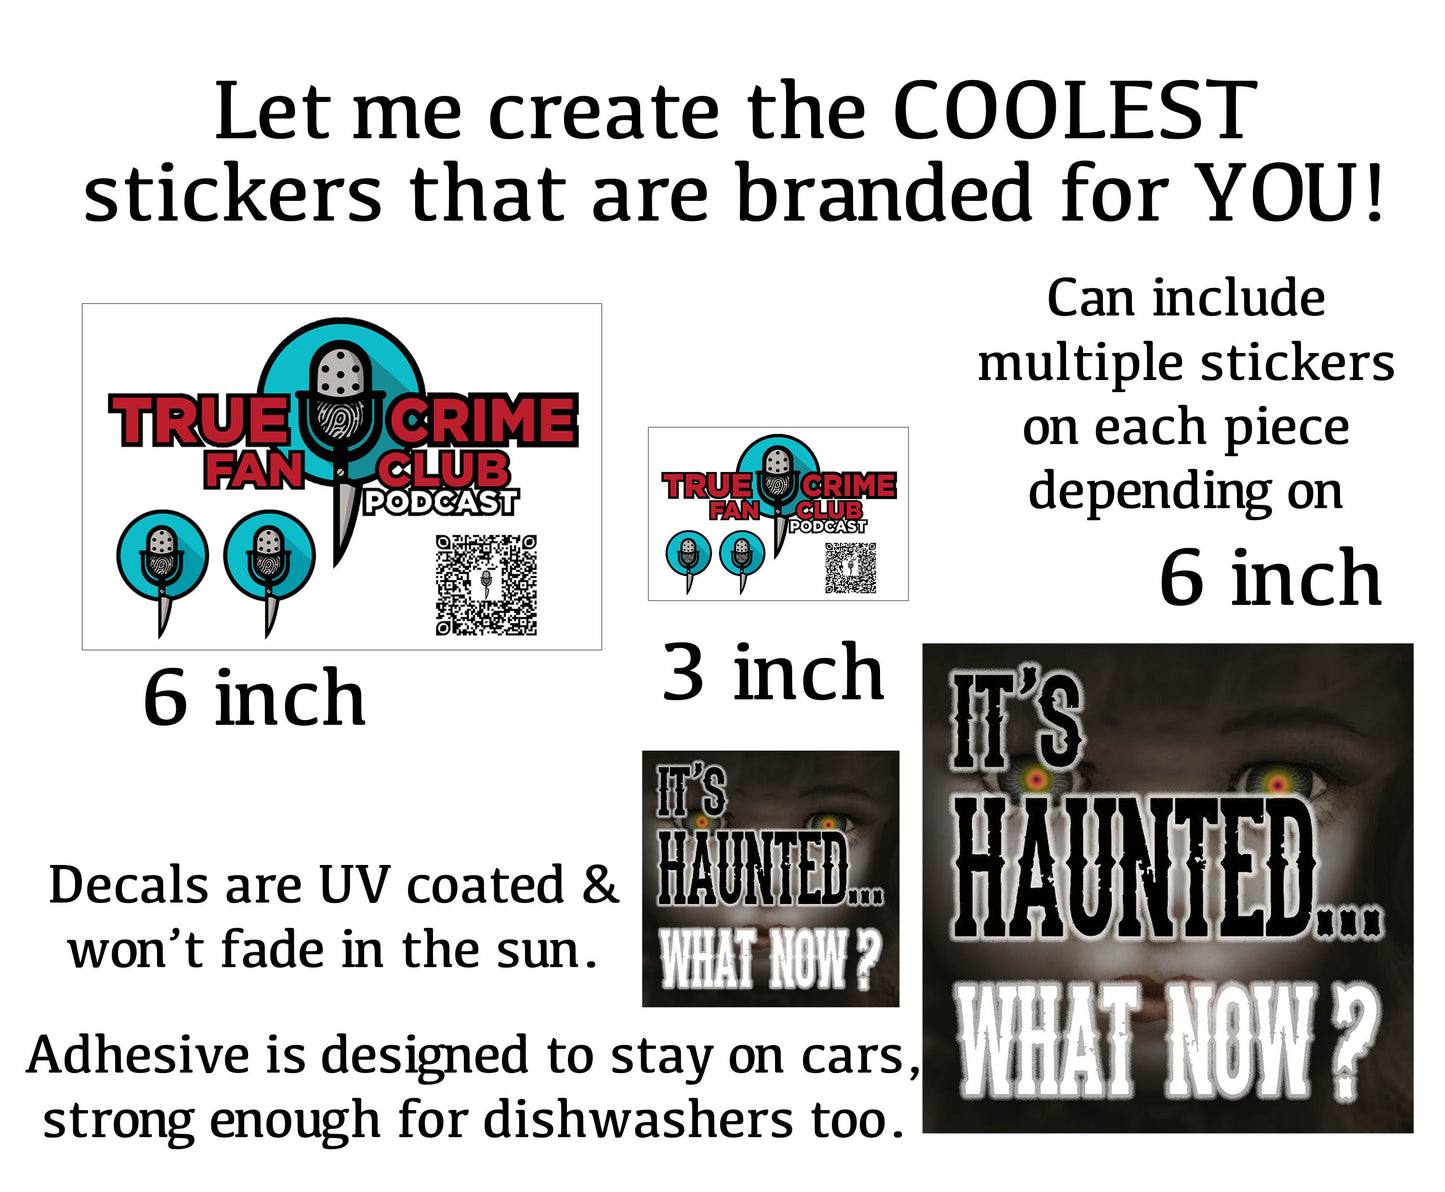 Branded Stickers